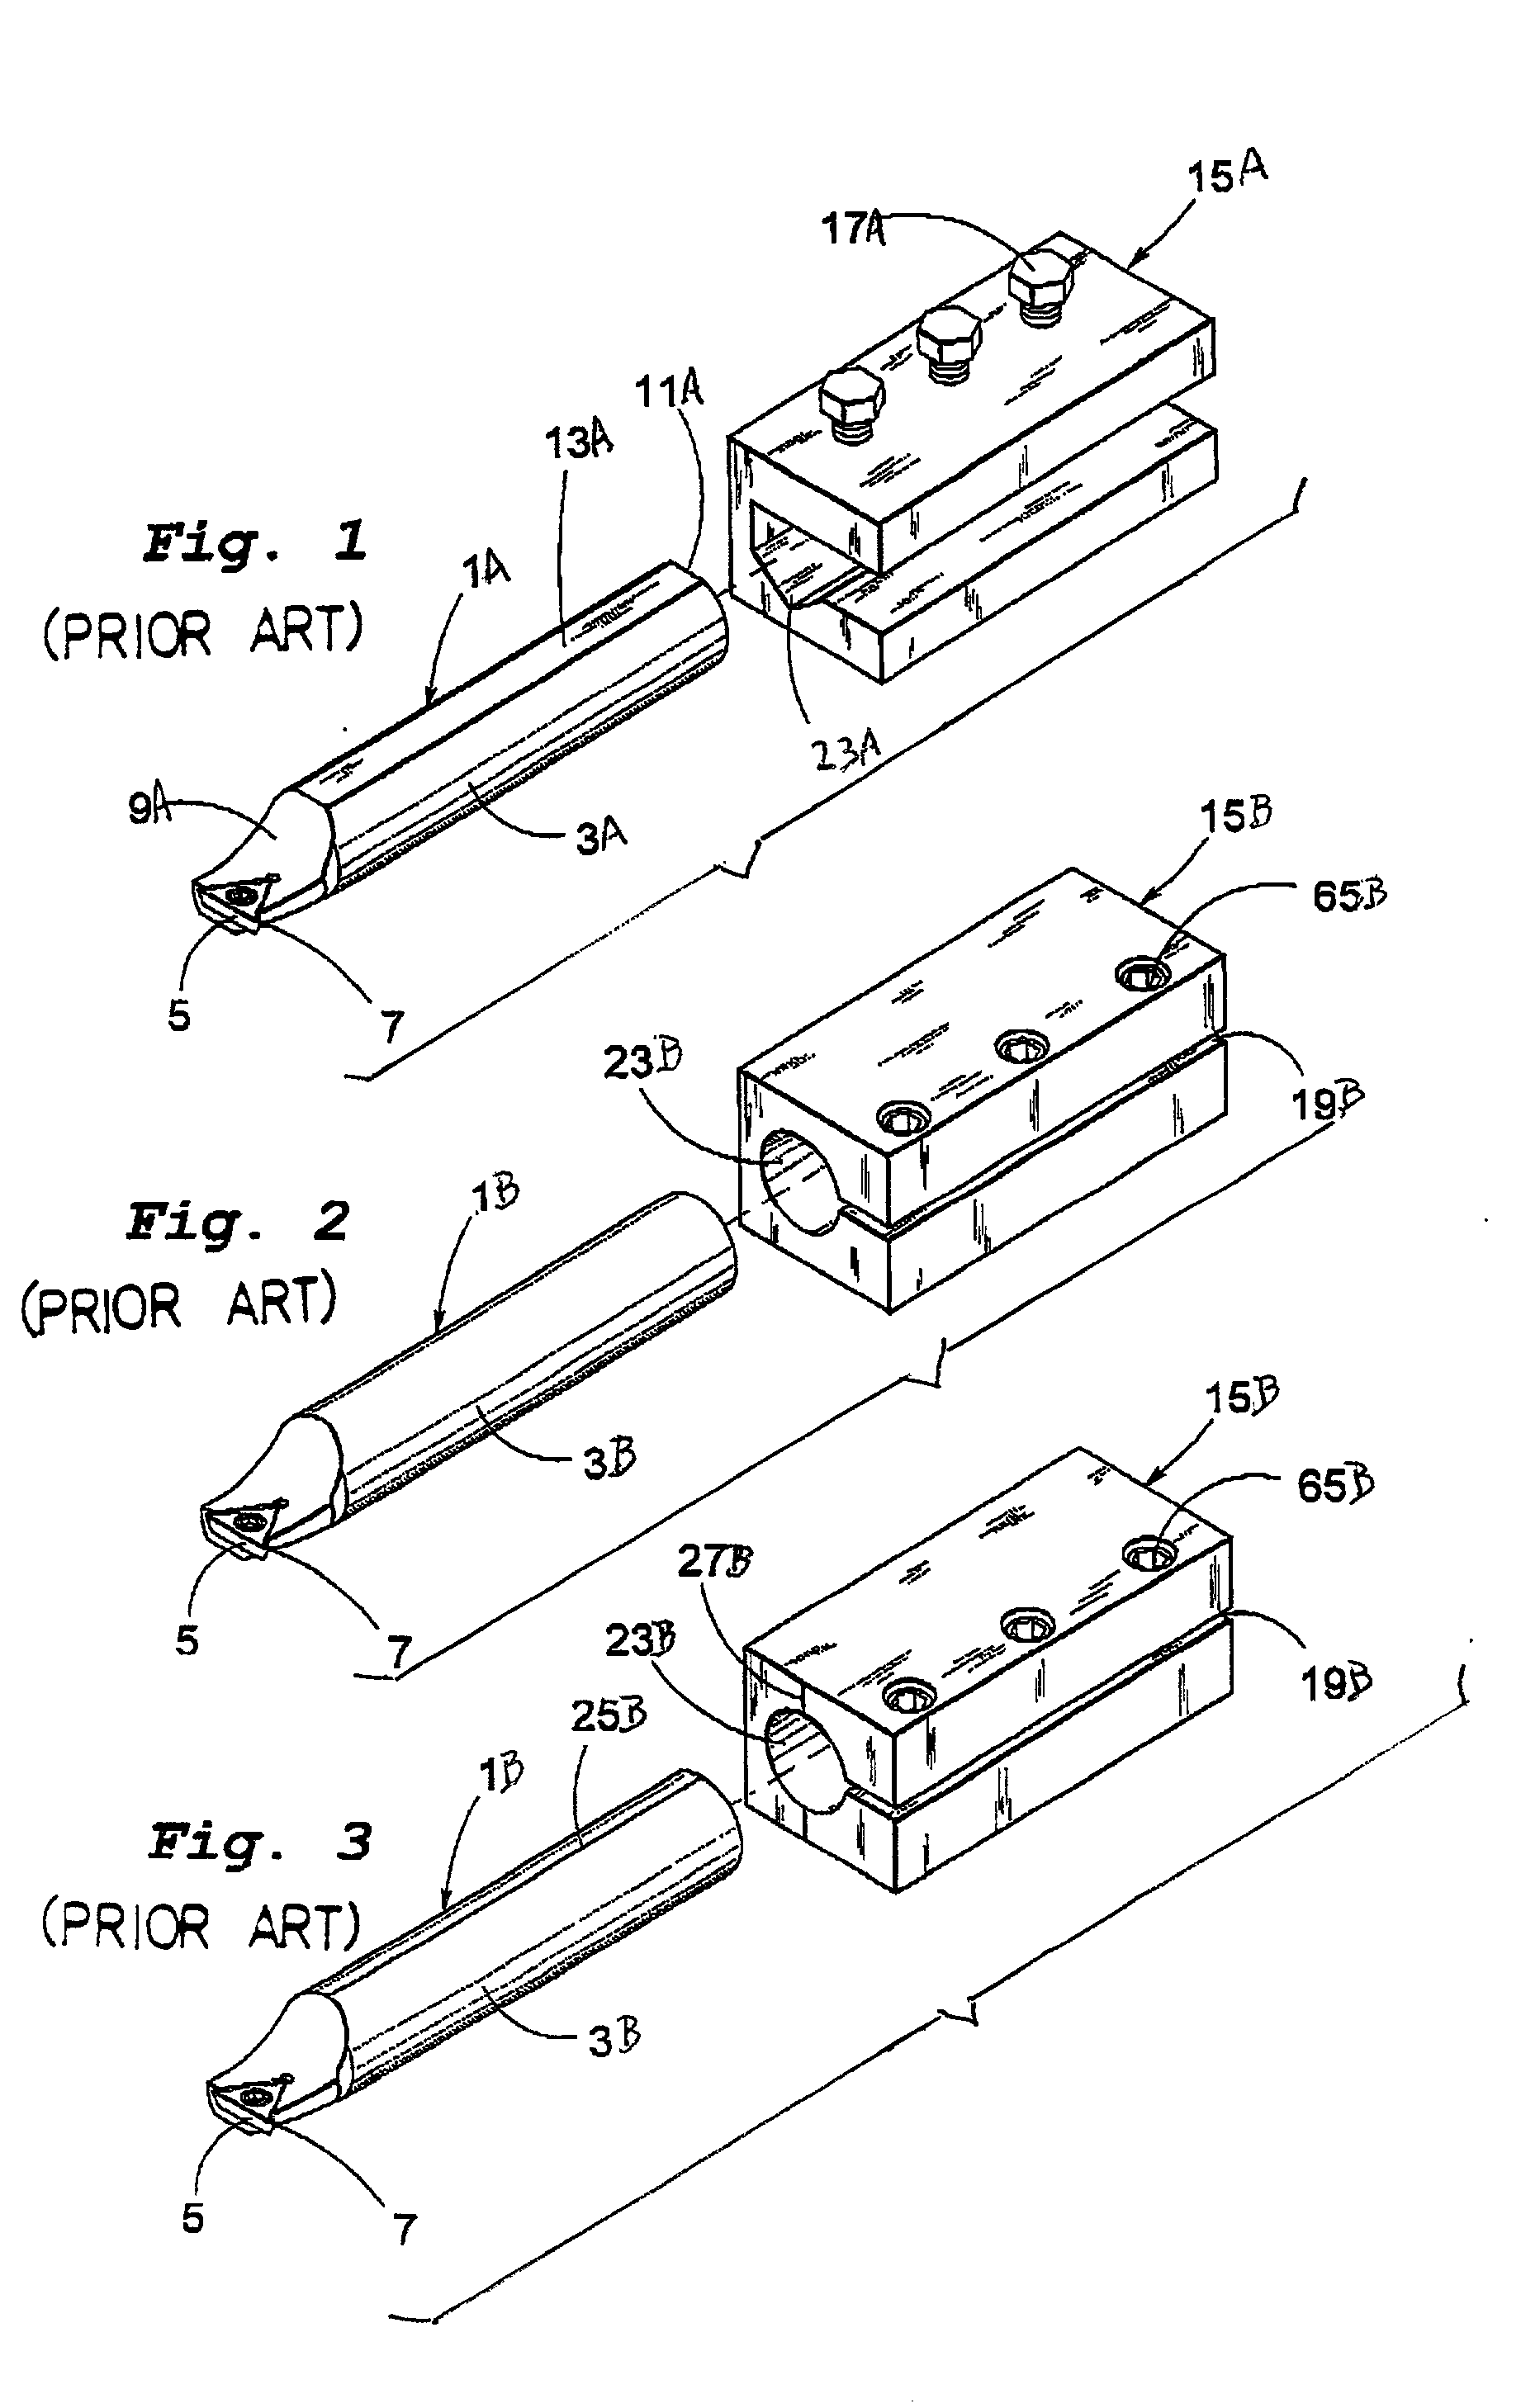 Cutting, tool system and mechanism for accurately positioning a cutting edge